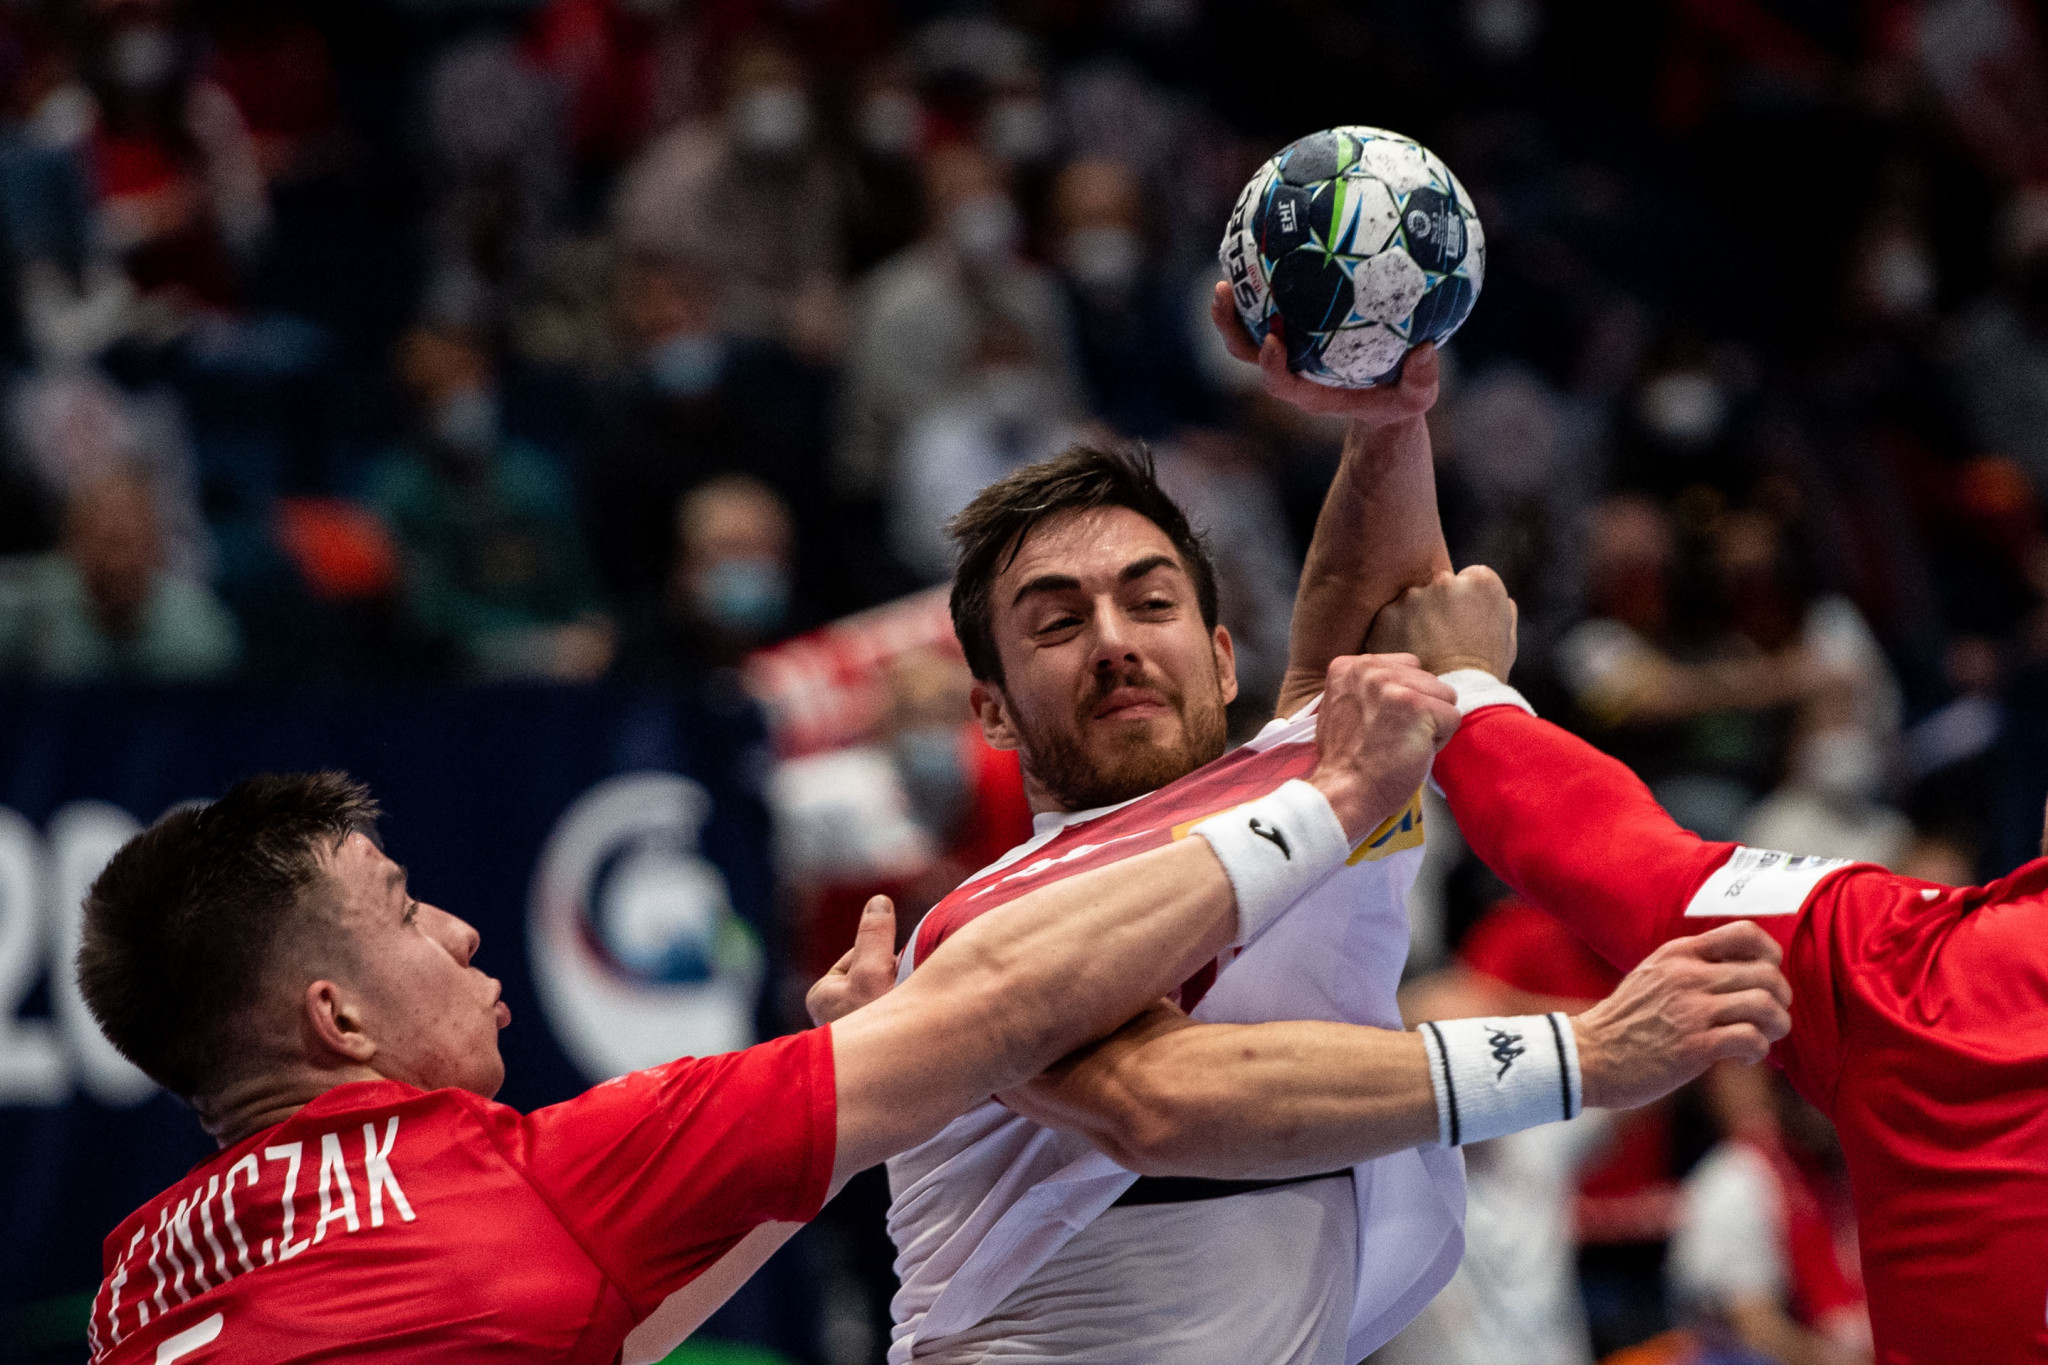 Poland, playing in red, defeated Austria in one of three preliminary round matches on day two of the men's European Handball Championship ©Getty Images 